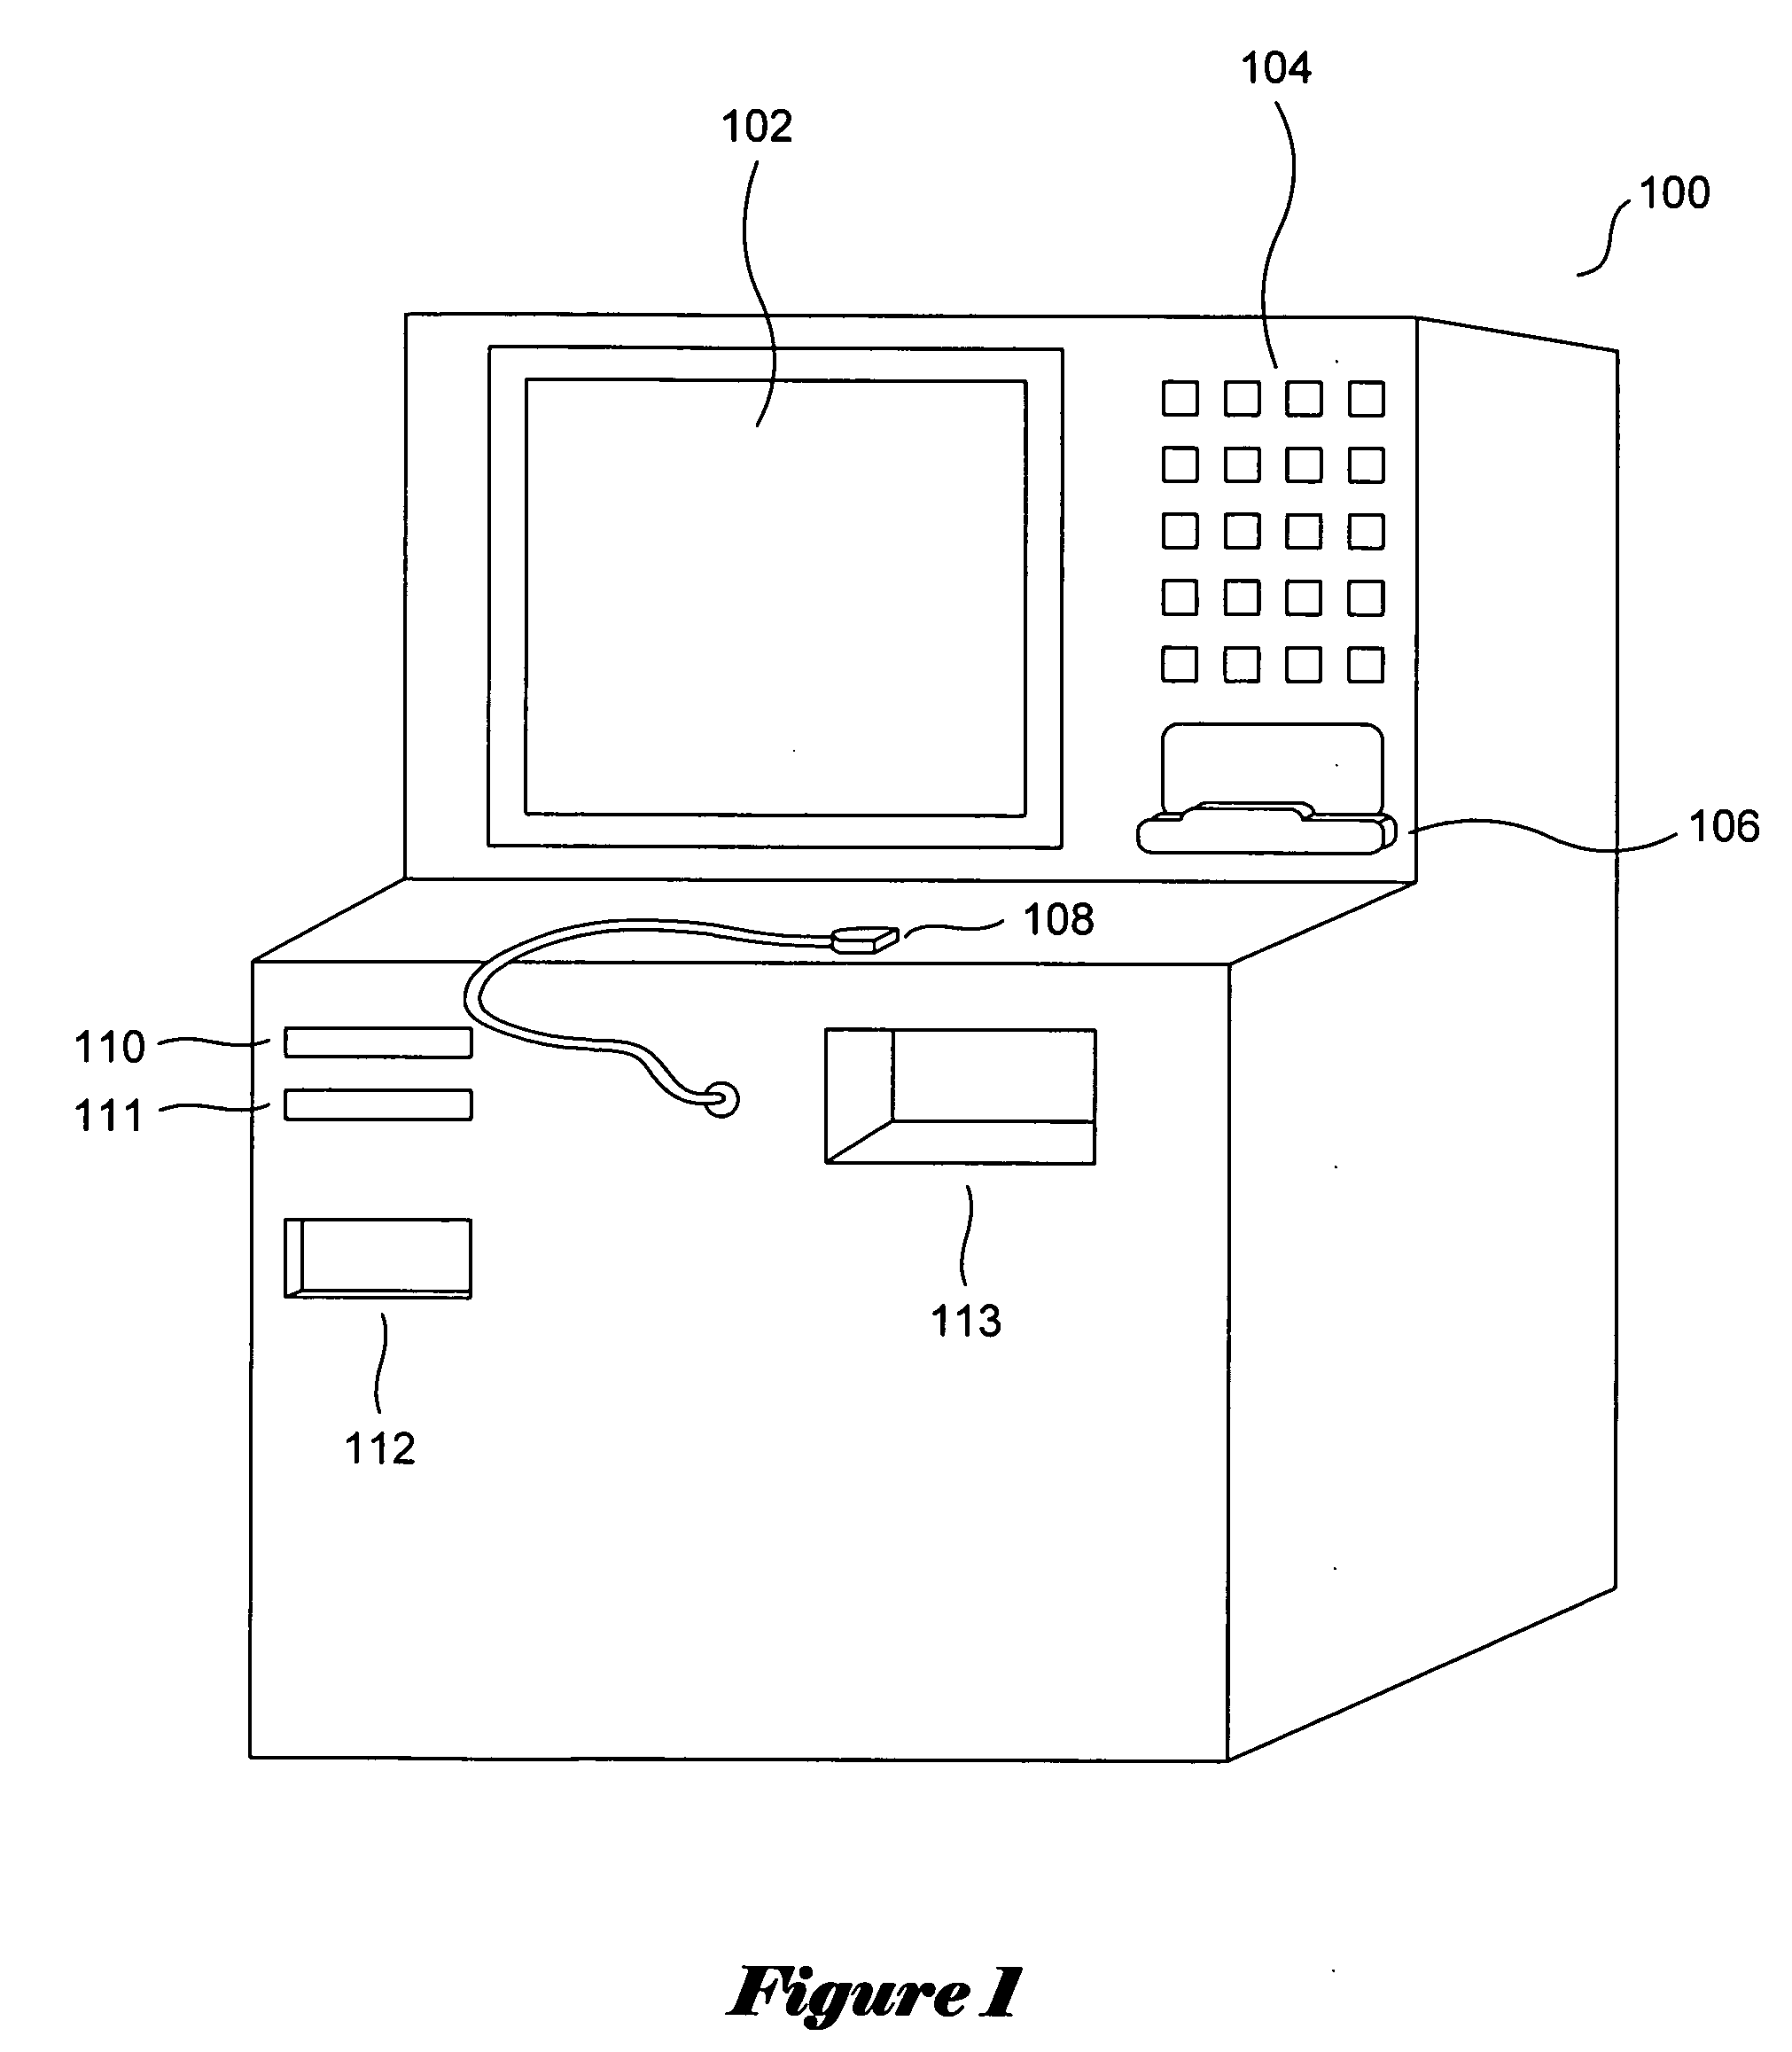 Methods and systems for logging into automated content vending systems for content delivery to portable devices